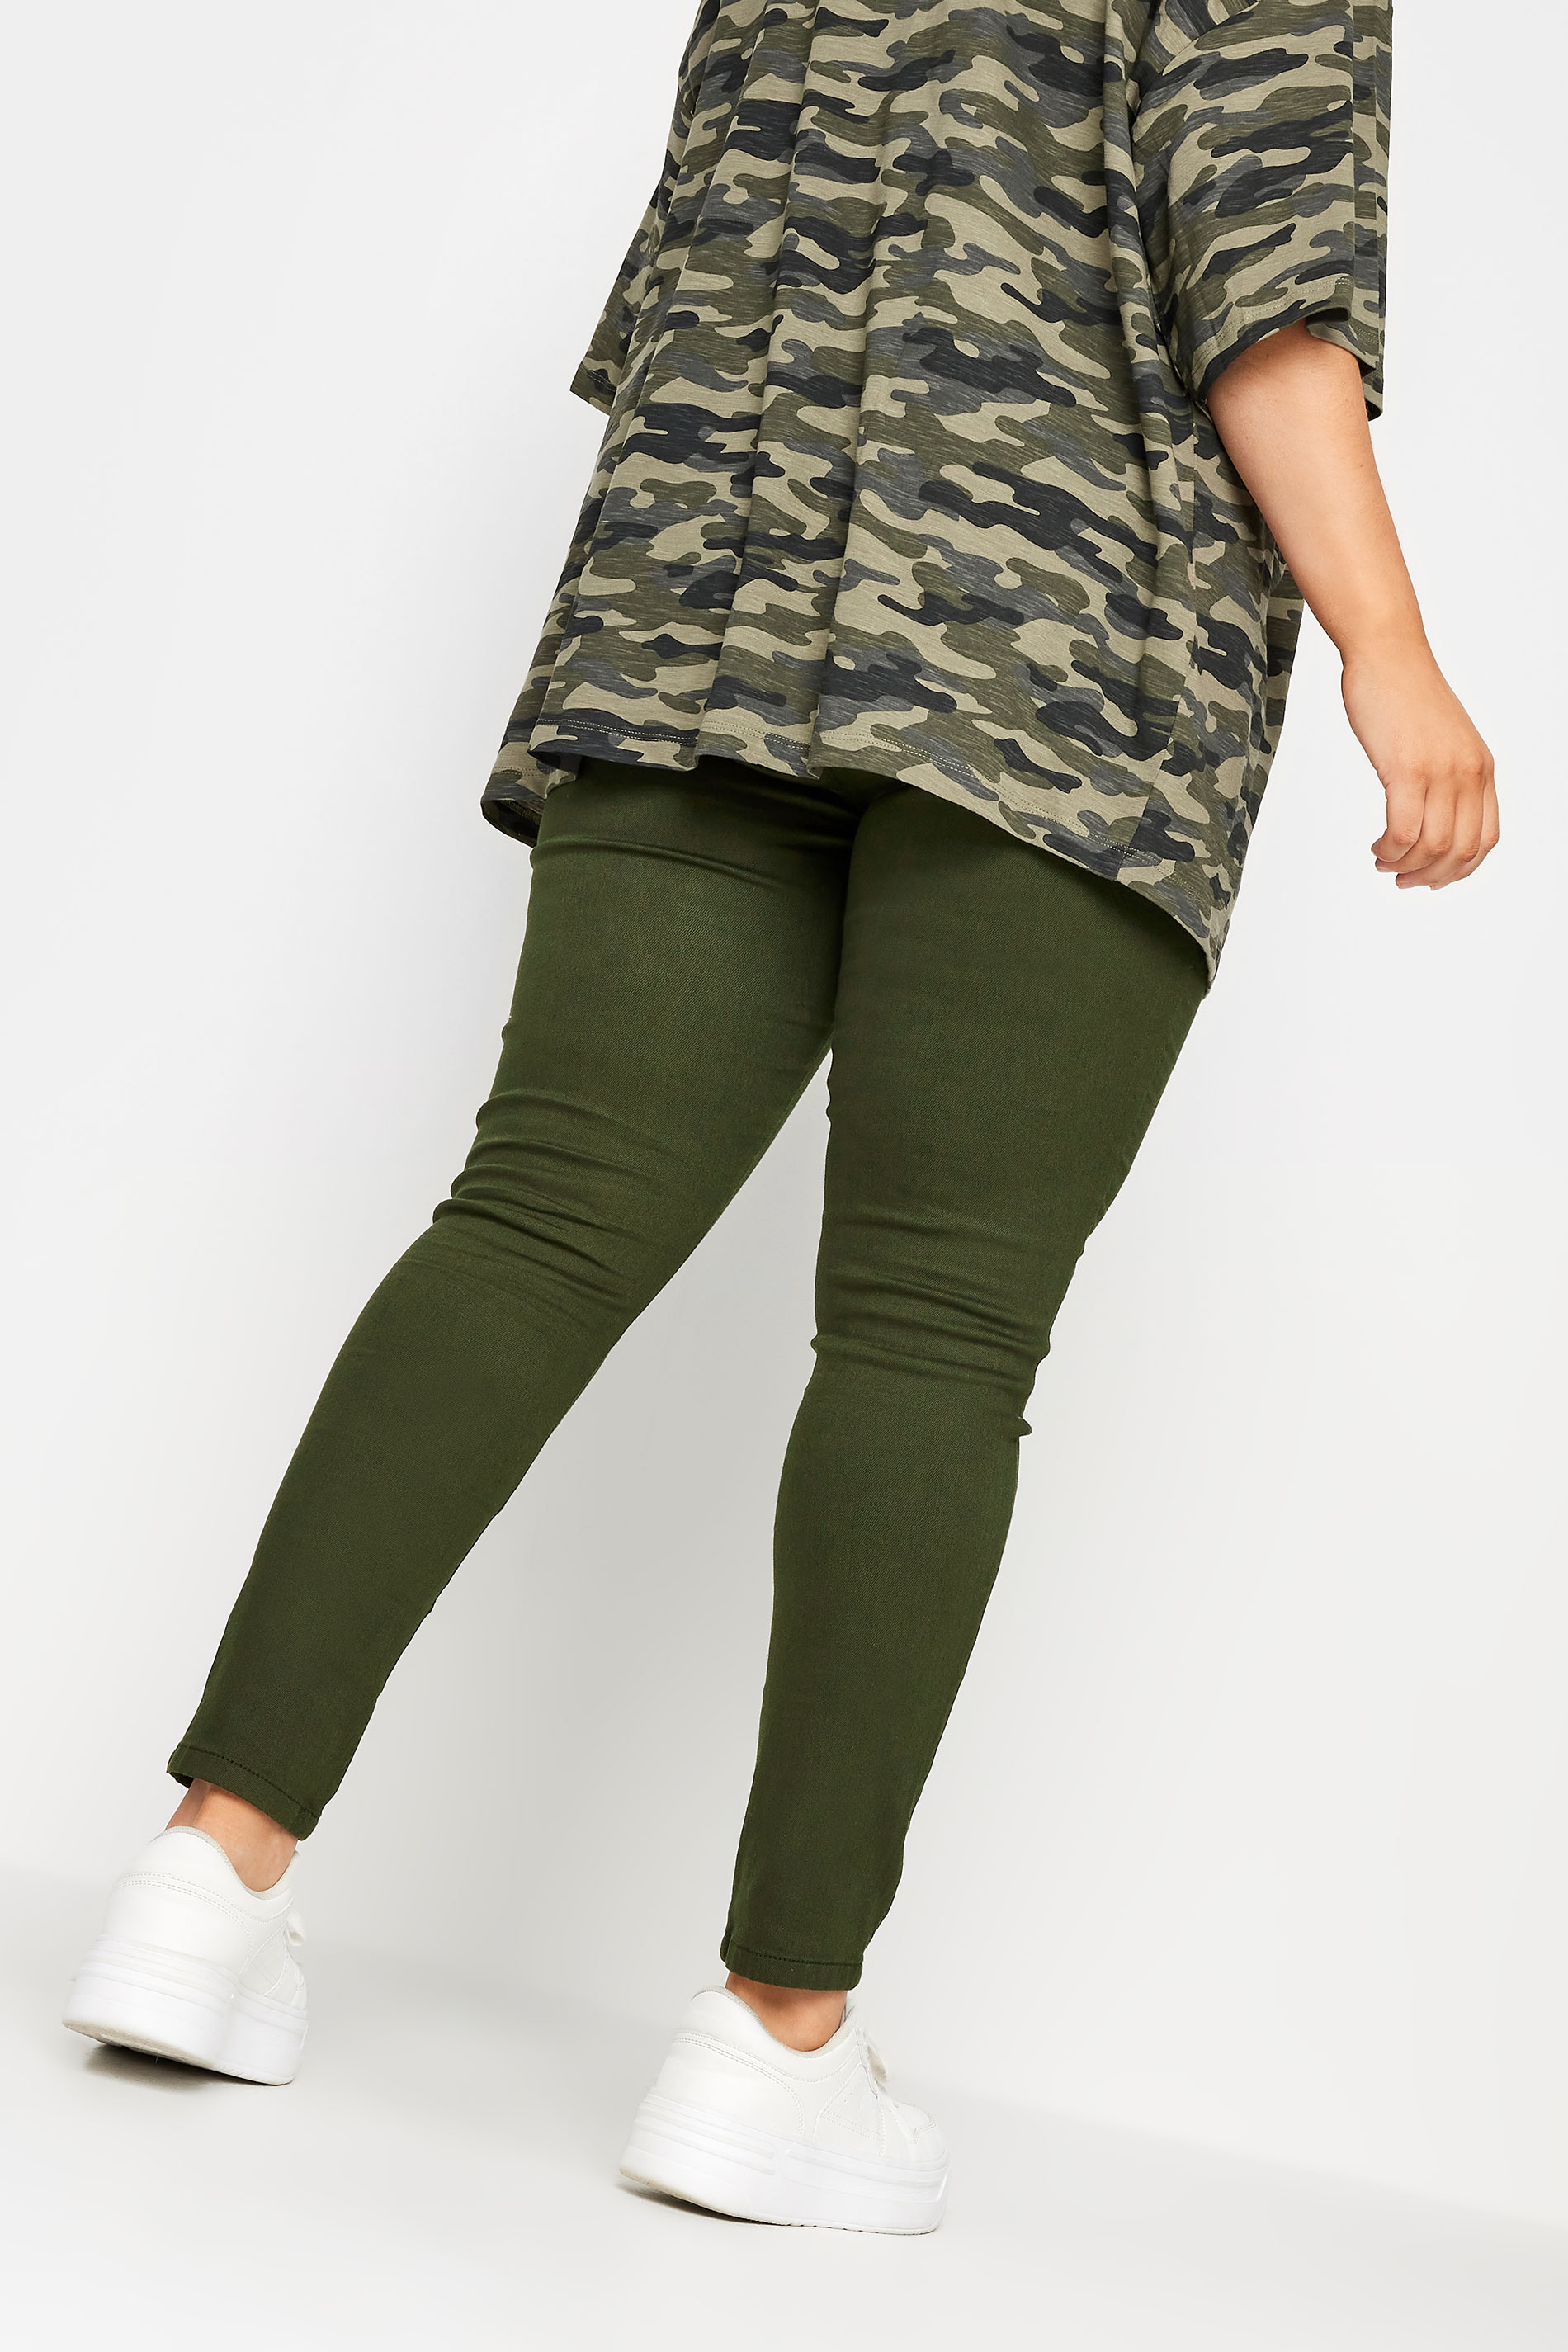 YOURS Plus Size Khaki Green Stretch Pull On GRACE Jeggings | Yours Clothing 3